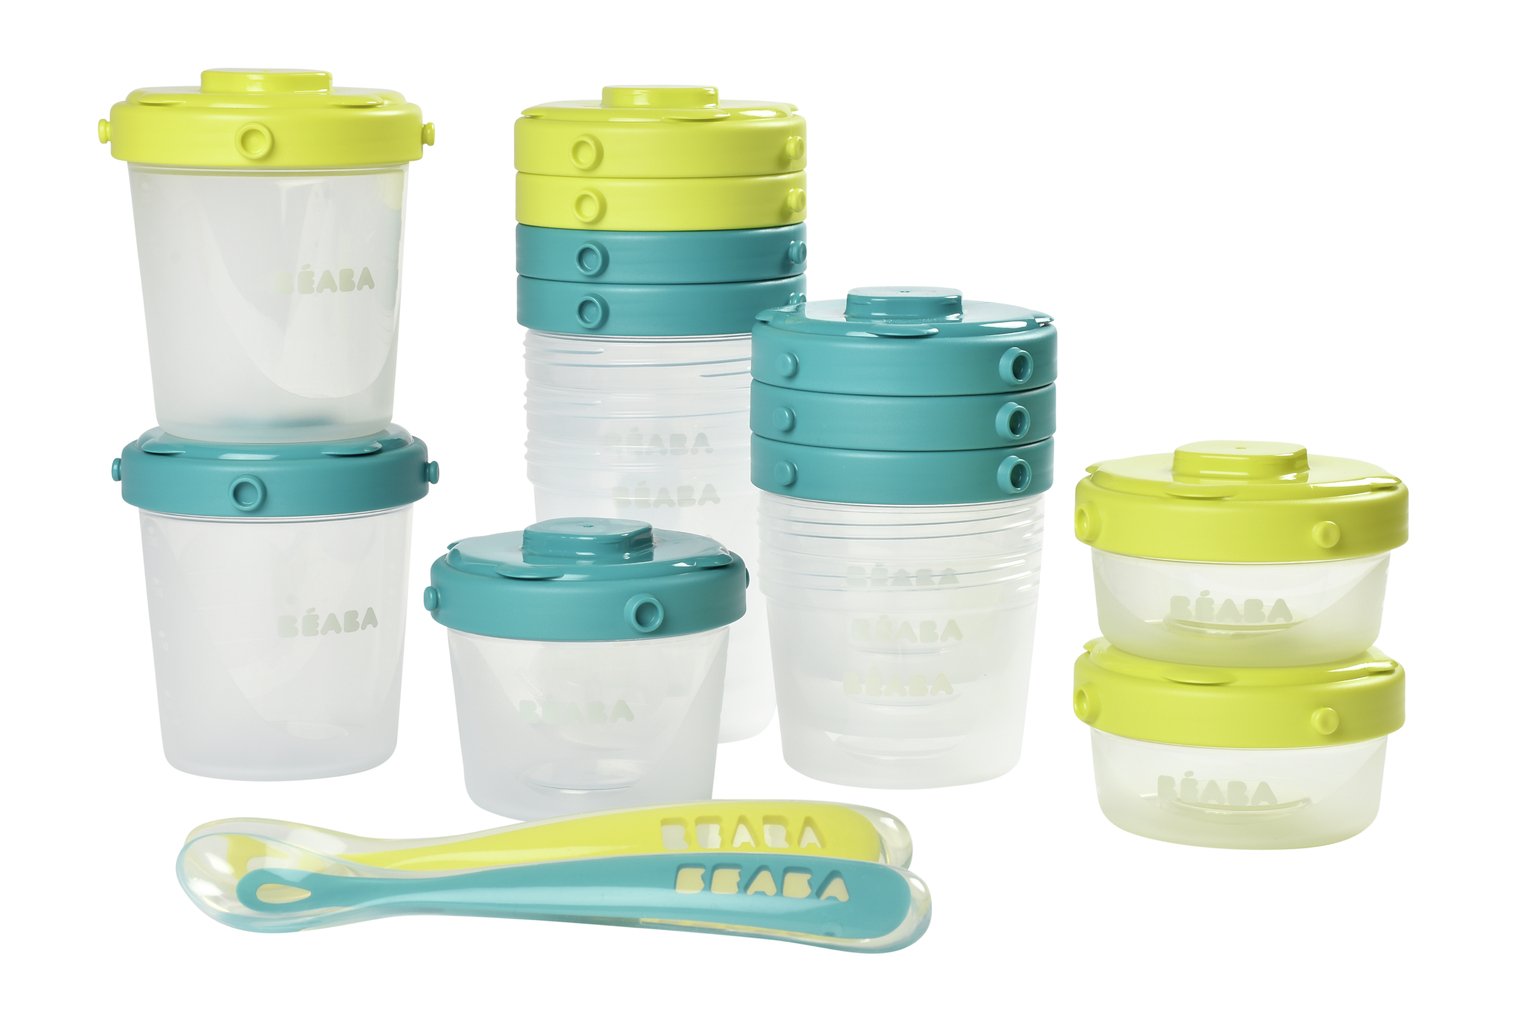 First Meal Set Review